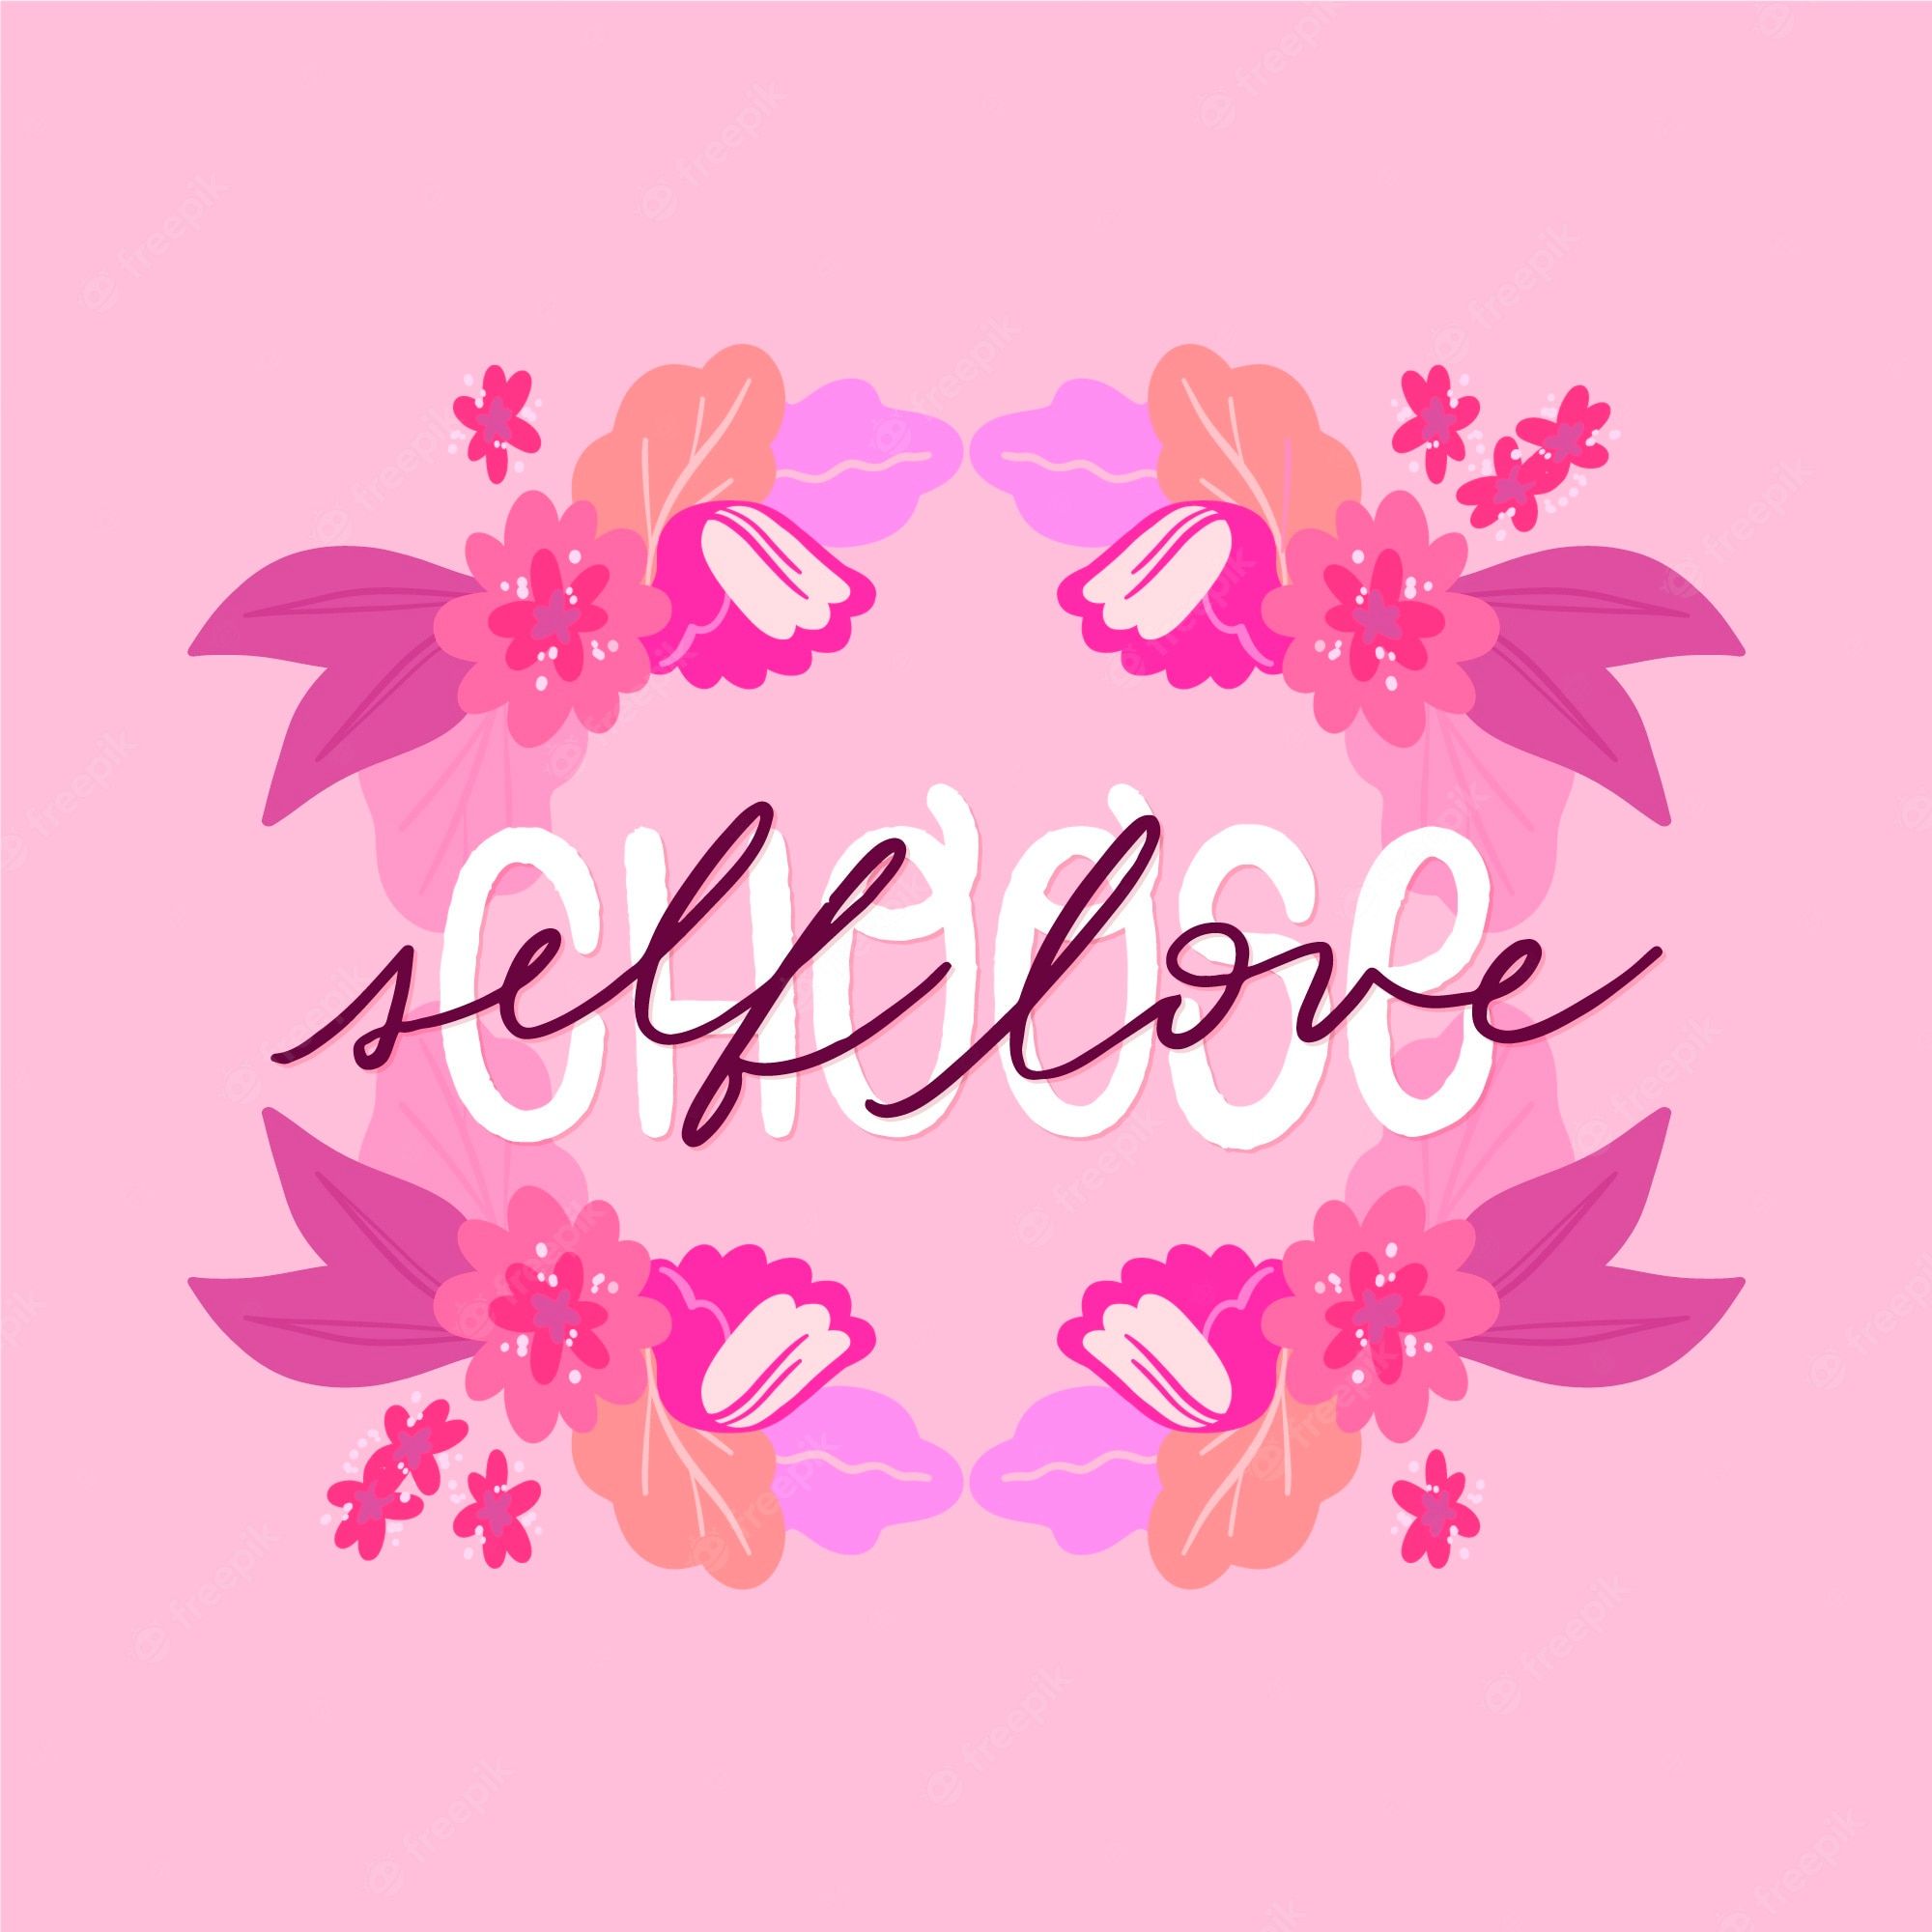 Free Vector. Self love lettering with flowers wallpaper